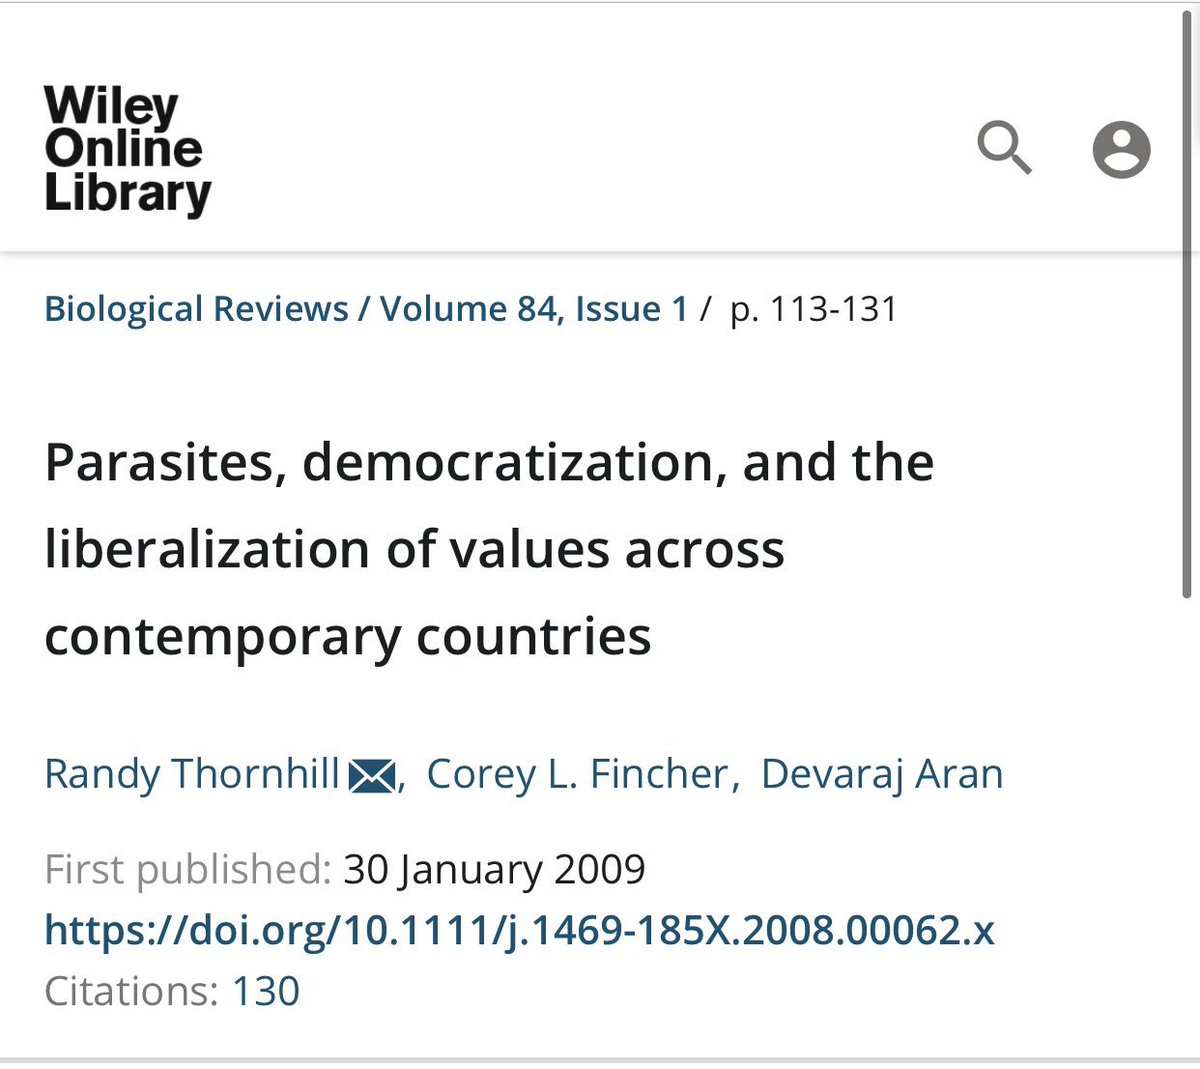 2/ Let’s start w/ the parasite hypothesis, which explains why “authoritarian governments are more likely to emerge in regions characterized by a high prevalence of disease-causing pathogens”. Studies also show parasite prevalence predicts measures of authoritarian governance